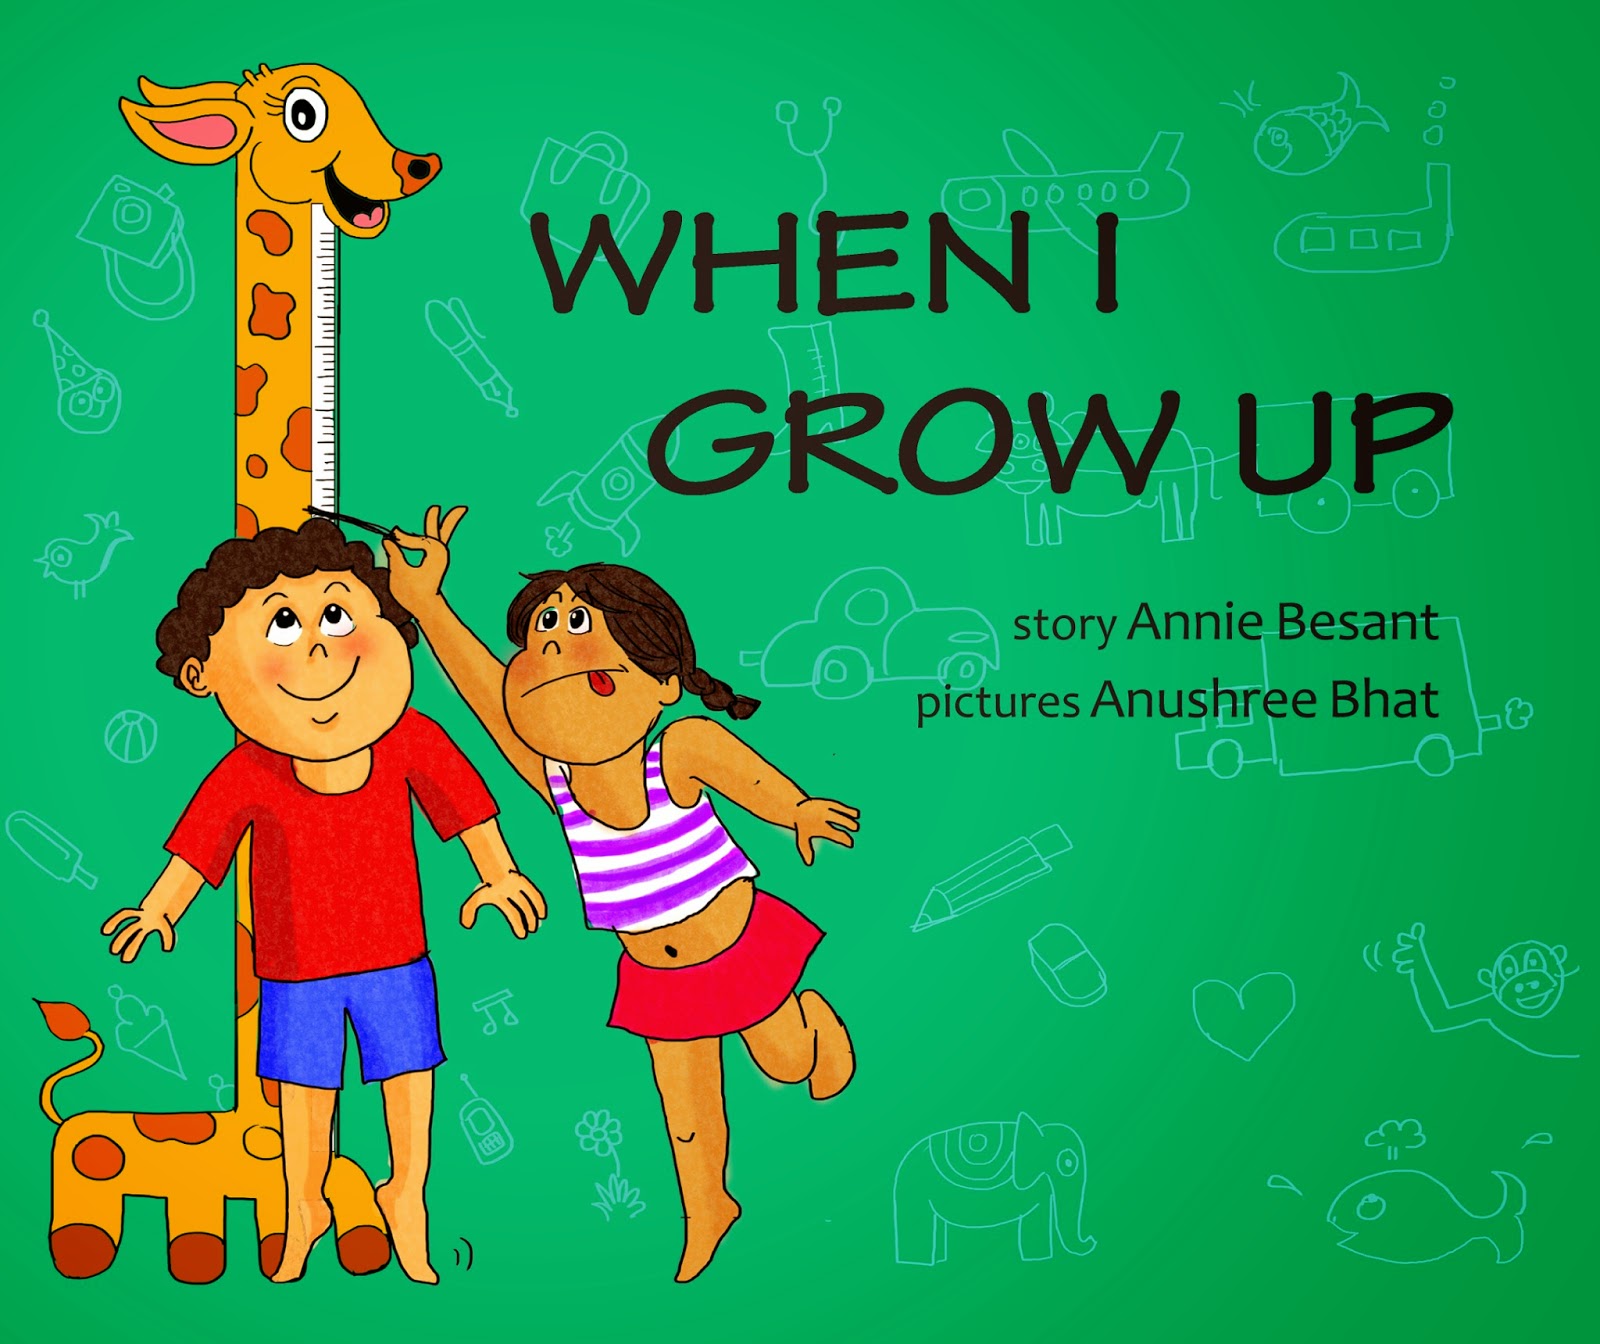 http://tulikabooks.com/our-books/picture-books/general-picture-books/when-i-grow-up